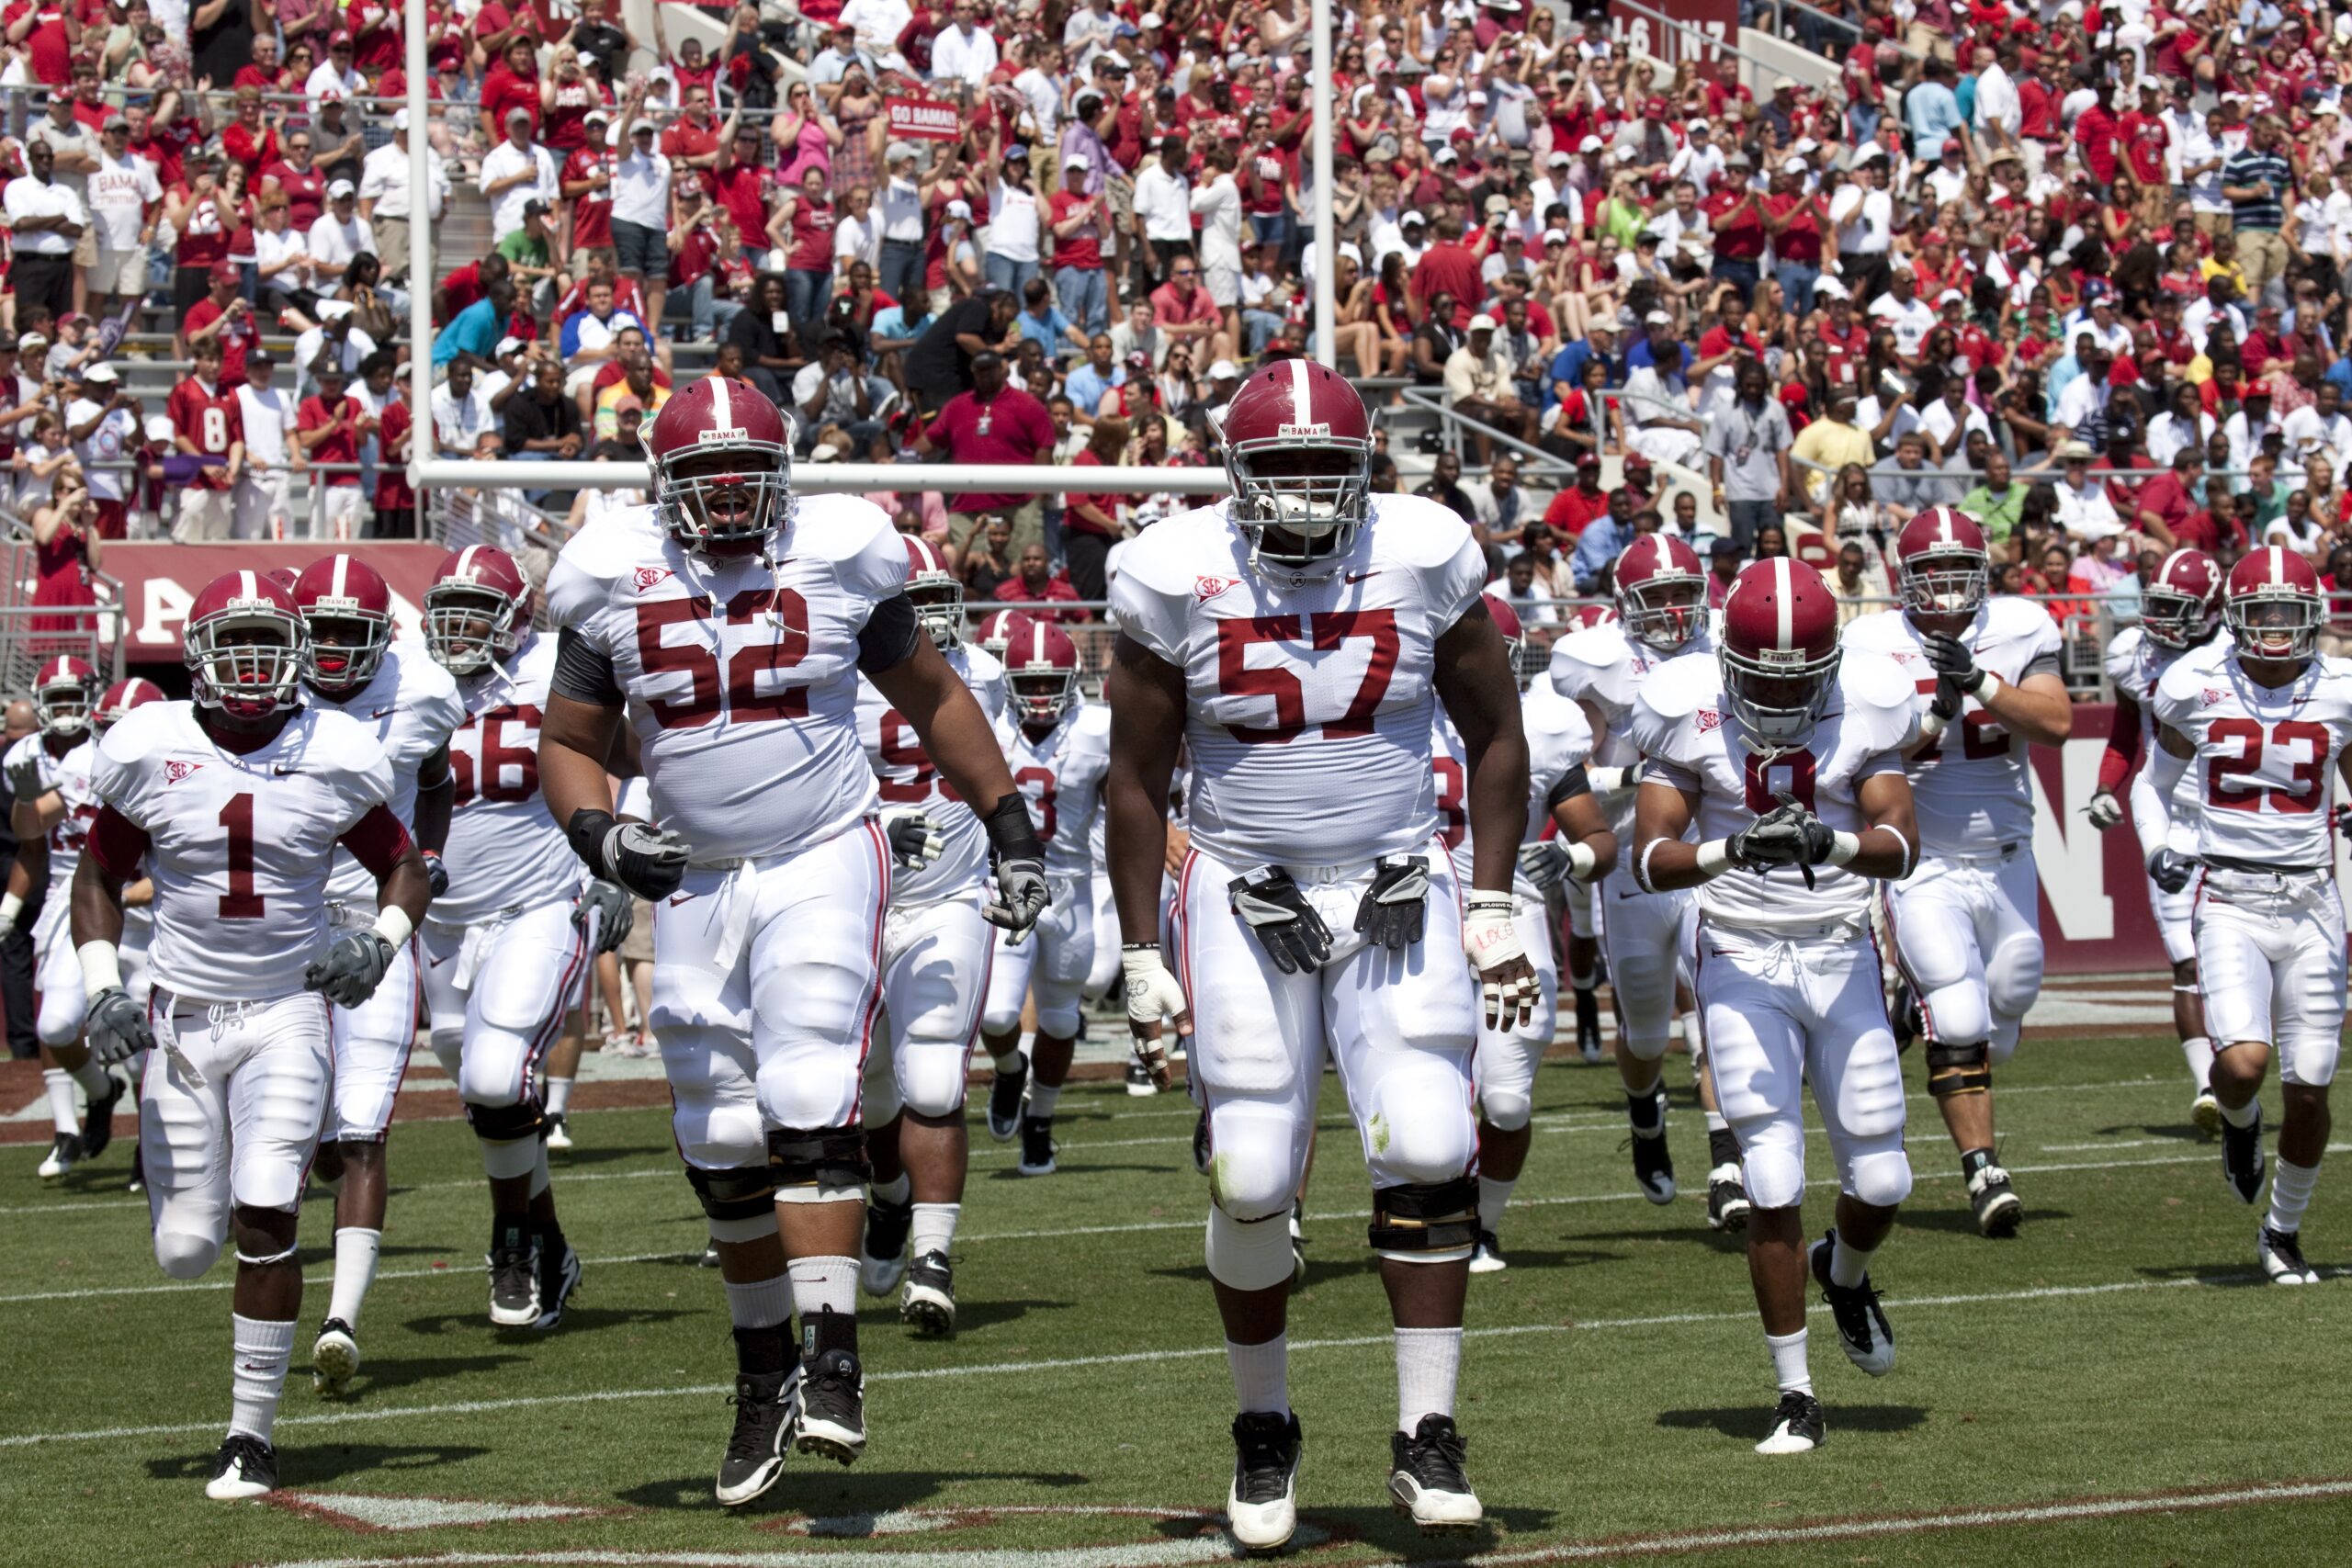 Alabama football team running out of tunnel